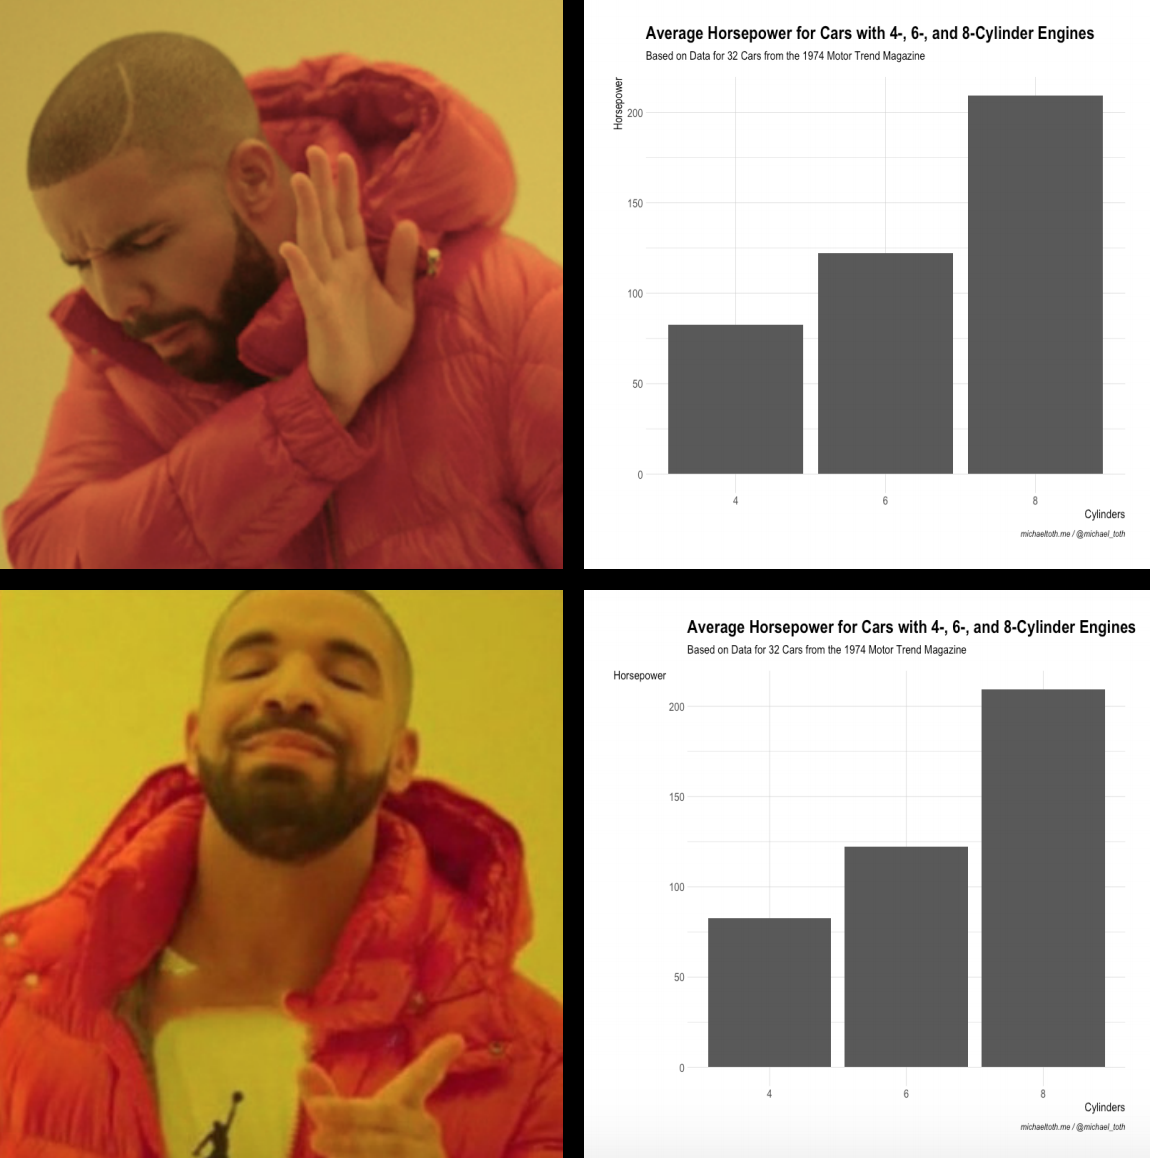 Drake Does Not Like Vertical Axis Labels in ggplot